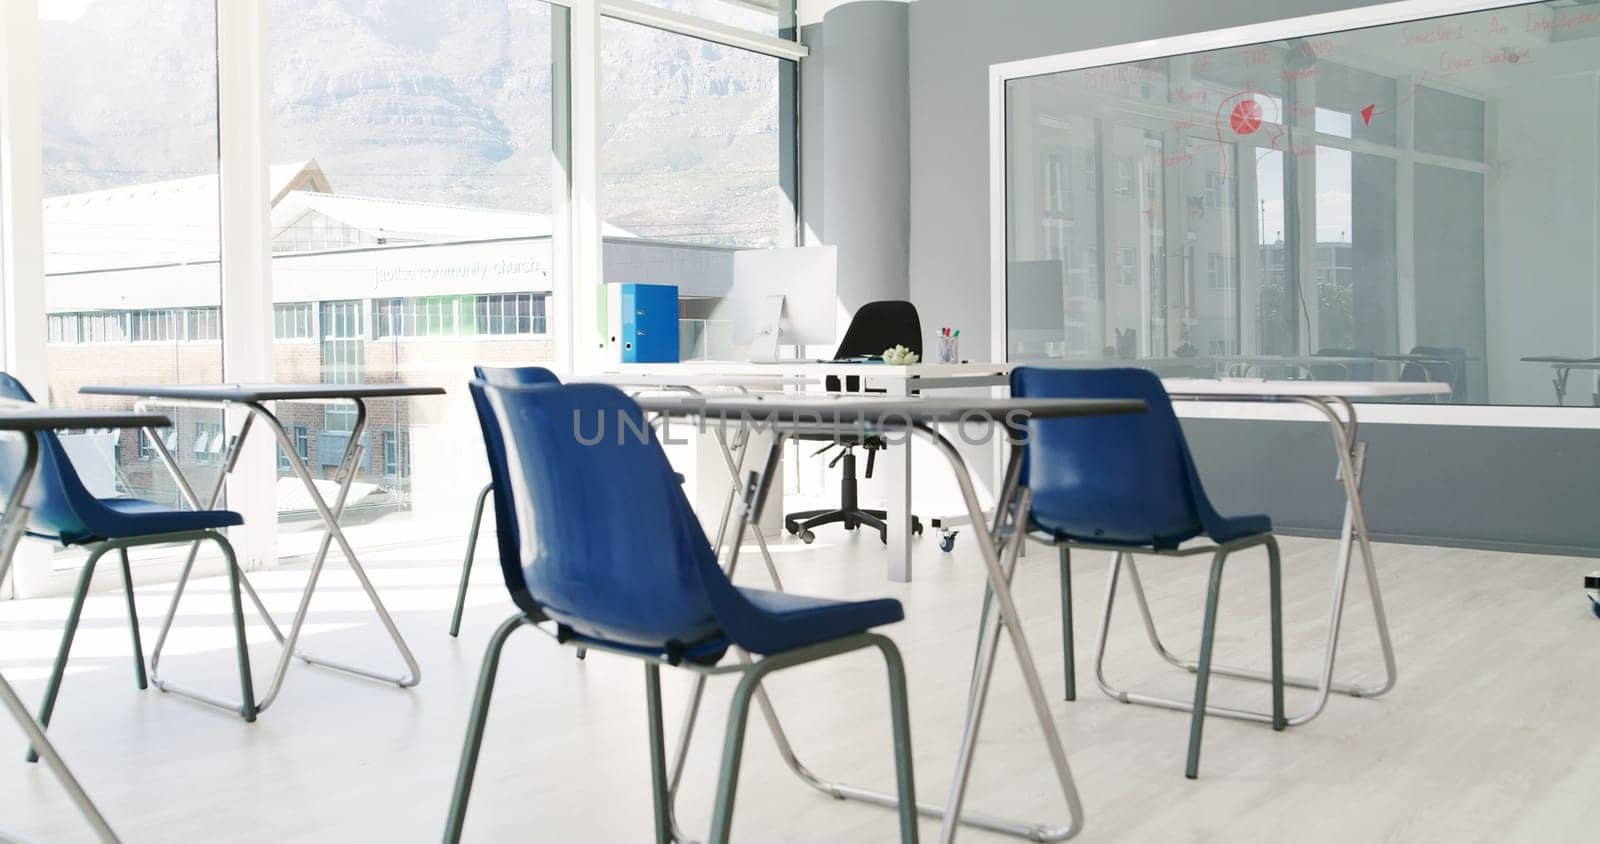 Empty, classroom and clean furniture with board for exam, test or setup of chairs, desks or interior. Indoor venue, layout or preparation of space for study, lesson or row with seats in arrangement by YuriArcurs